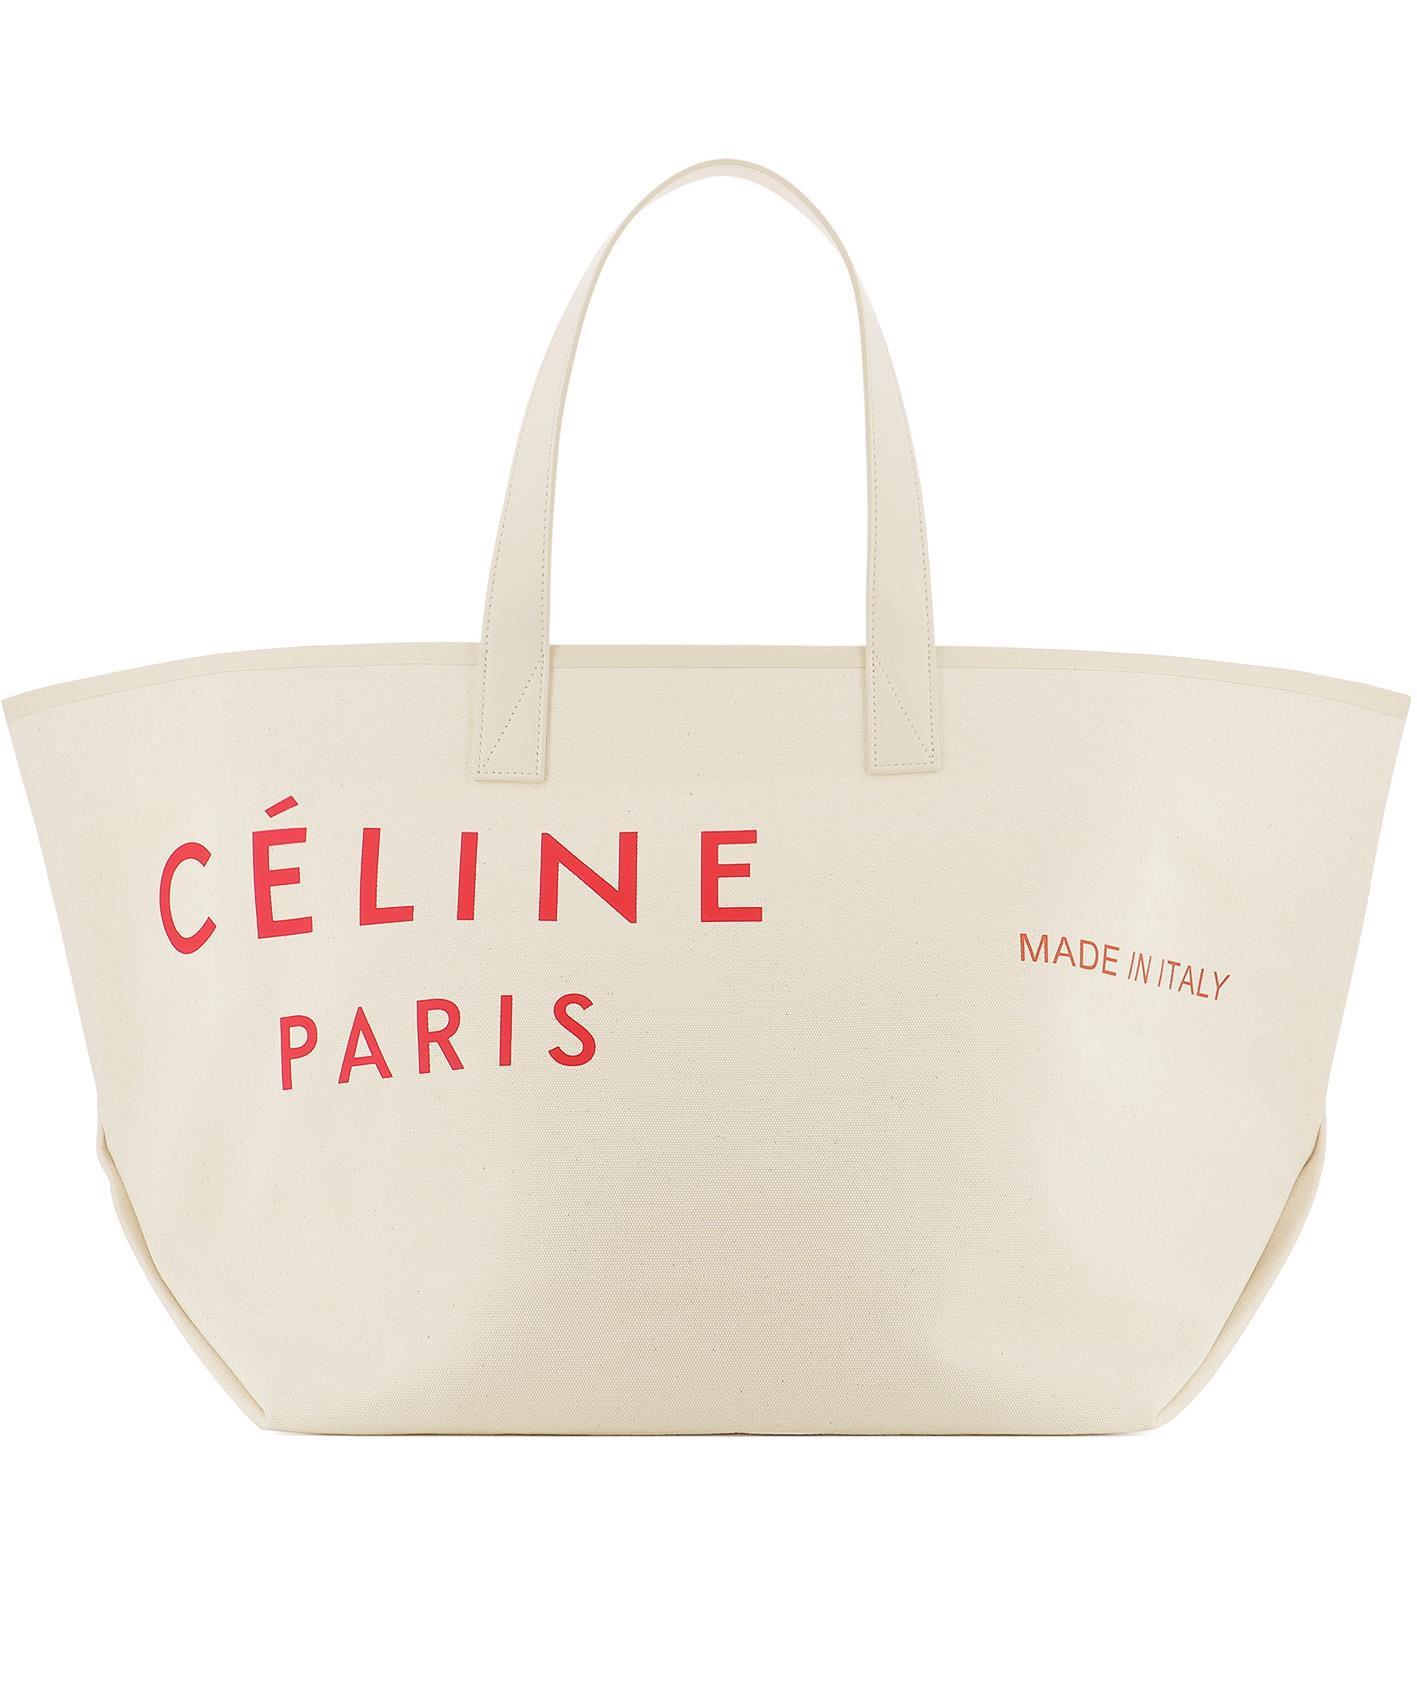 Celine Leather Cabas Shopper Tote in White - Lyst